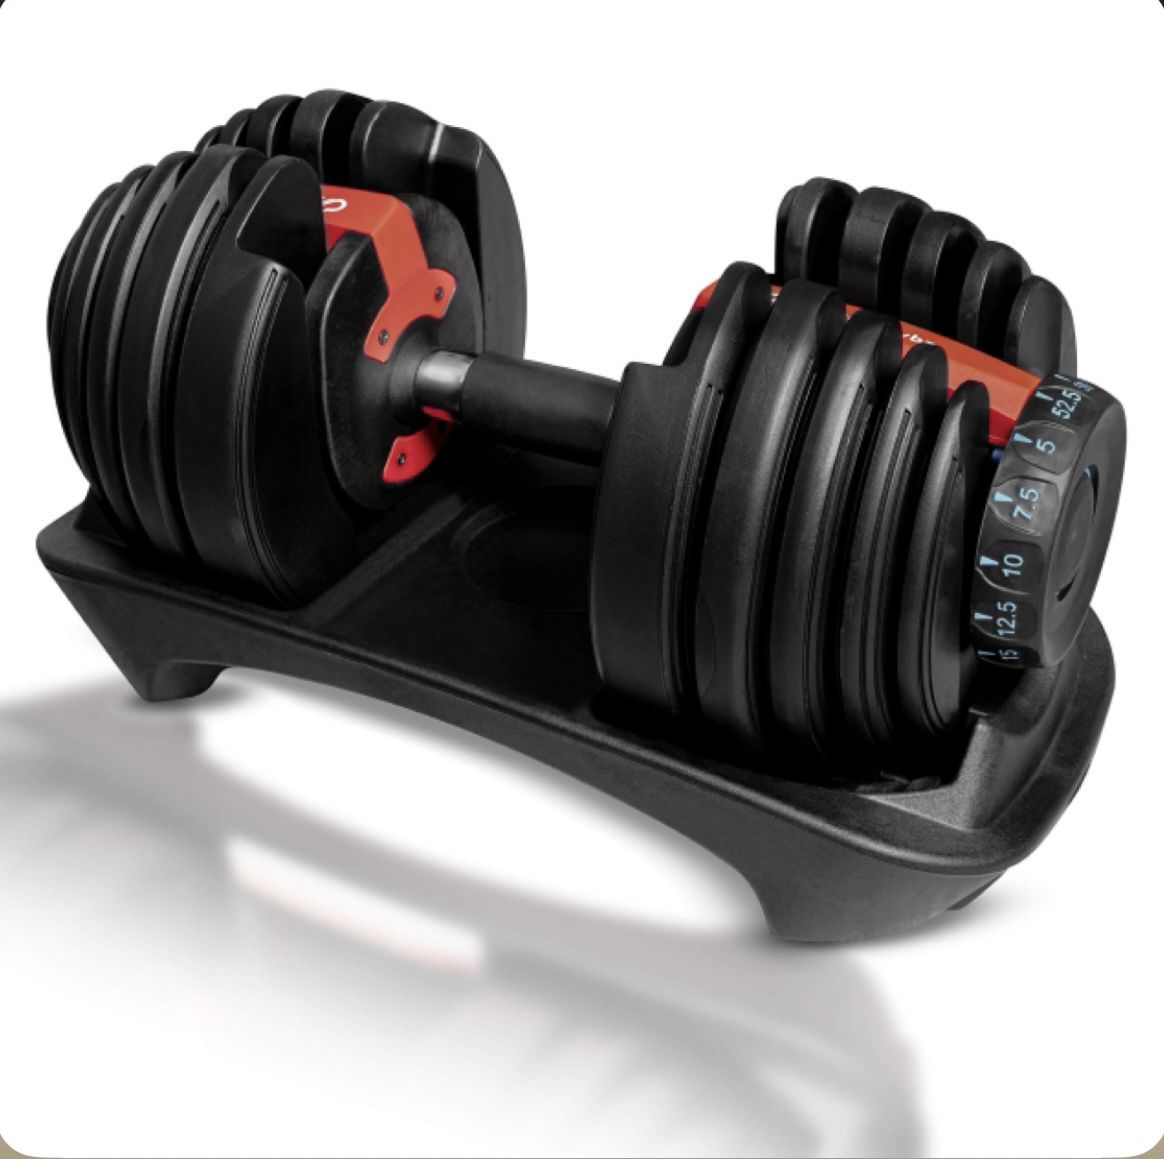 DREAM VYBZ (Single Adjustable Dumbbell 5 to 52.5 lbs |Weights |Barbell |Exercise & Fitness Dumbbells |Weight Bench |Workout Equipment |dumbellsweights